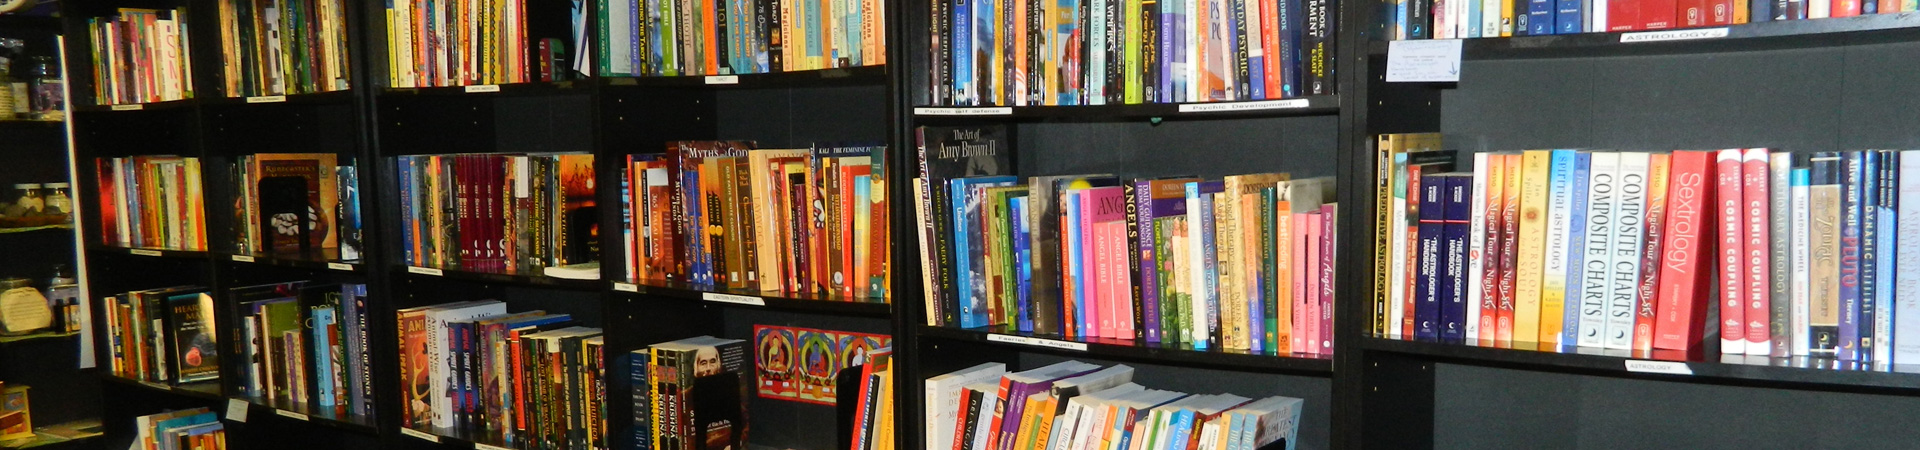 Large bookshelves filles with books